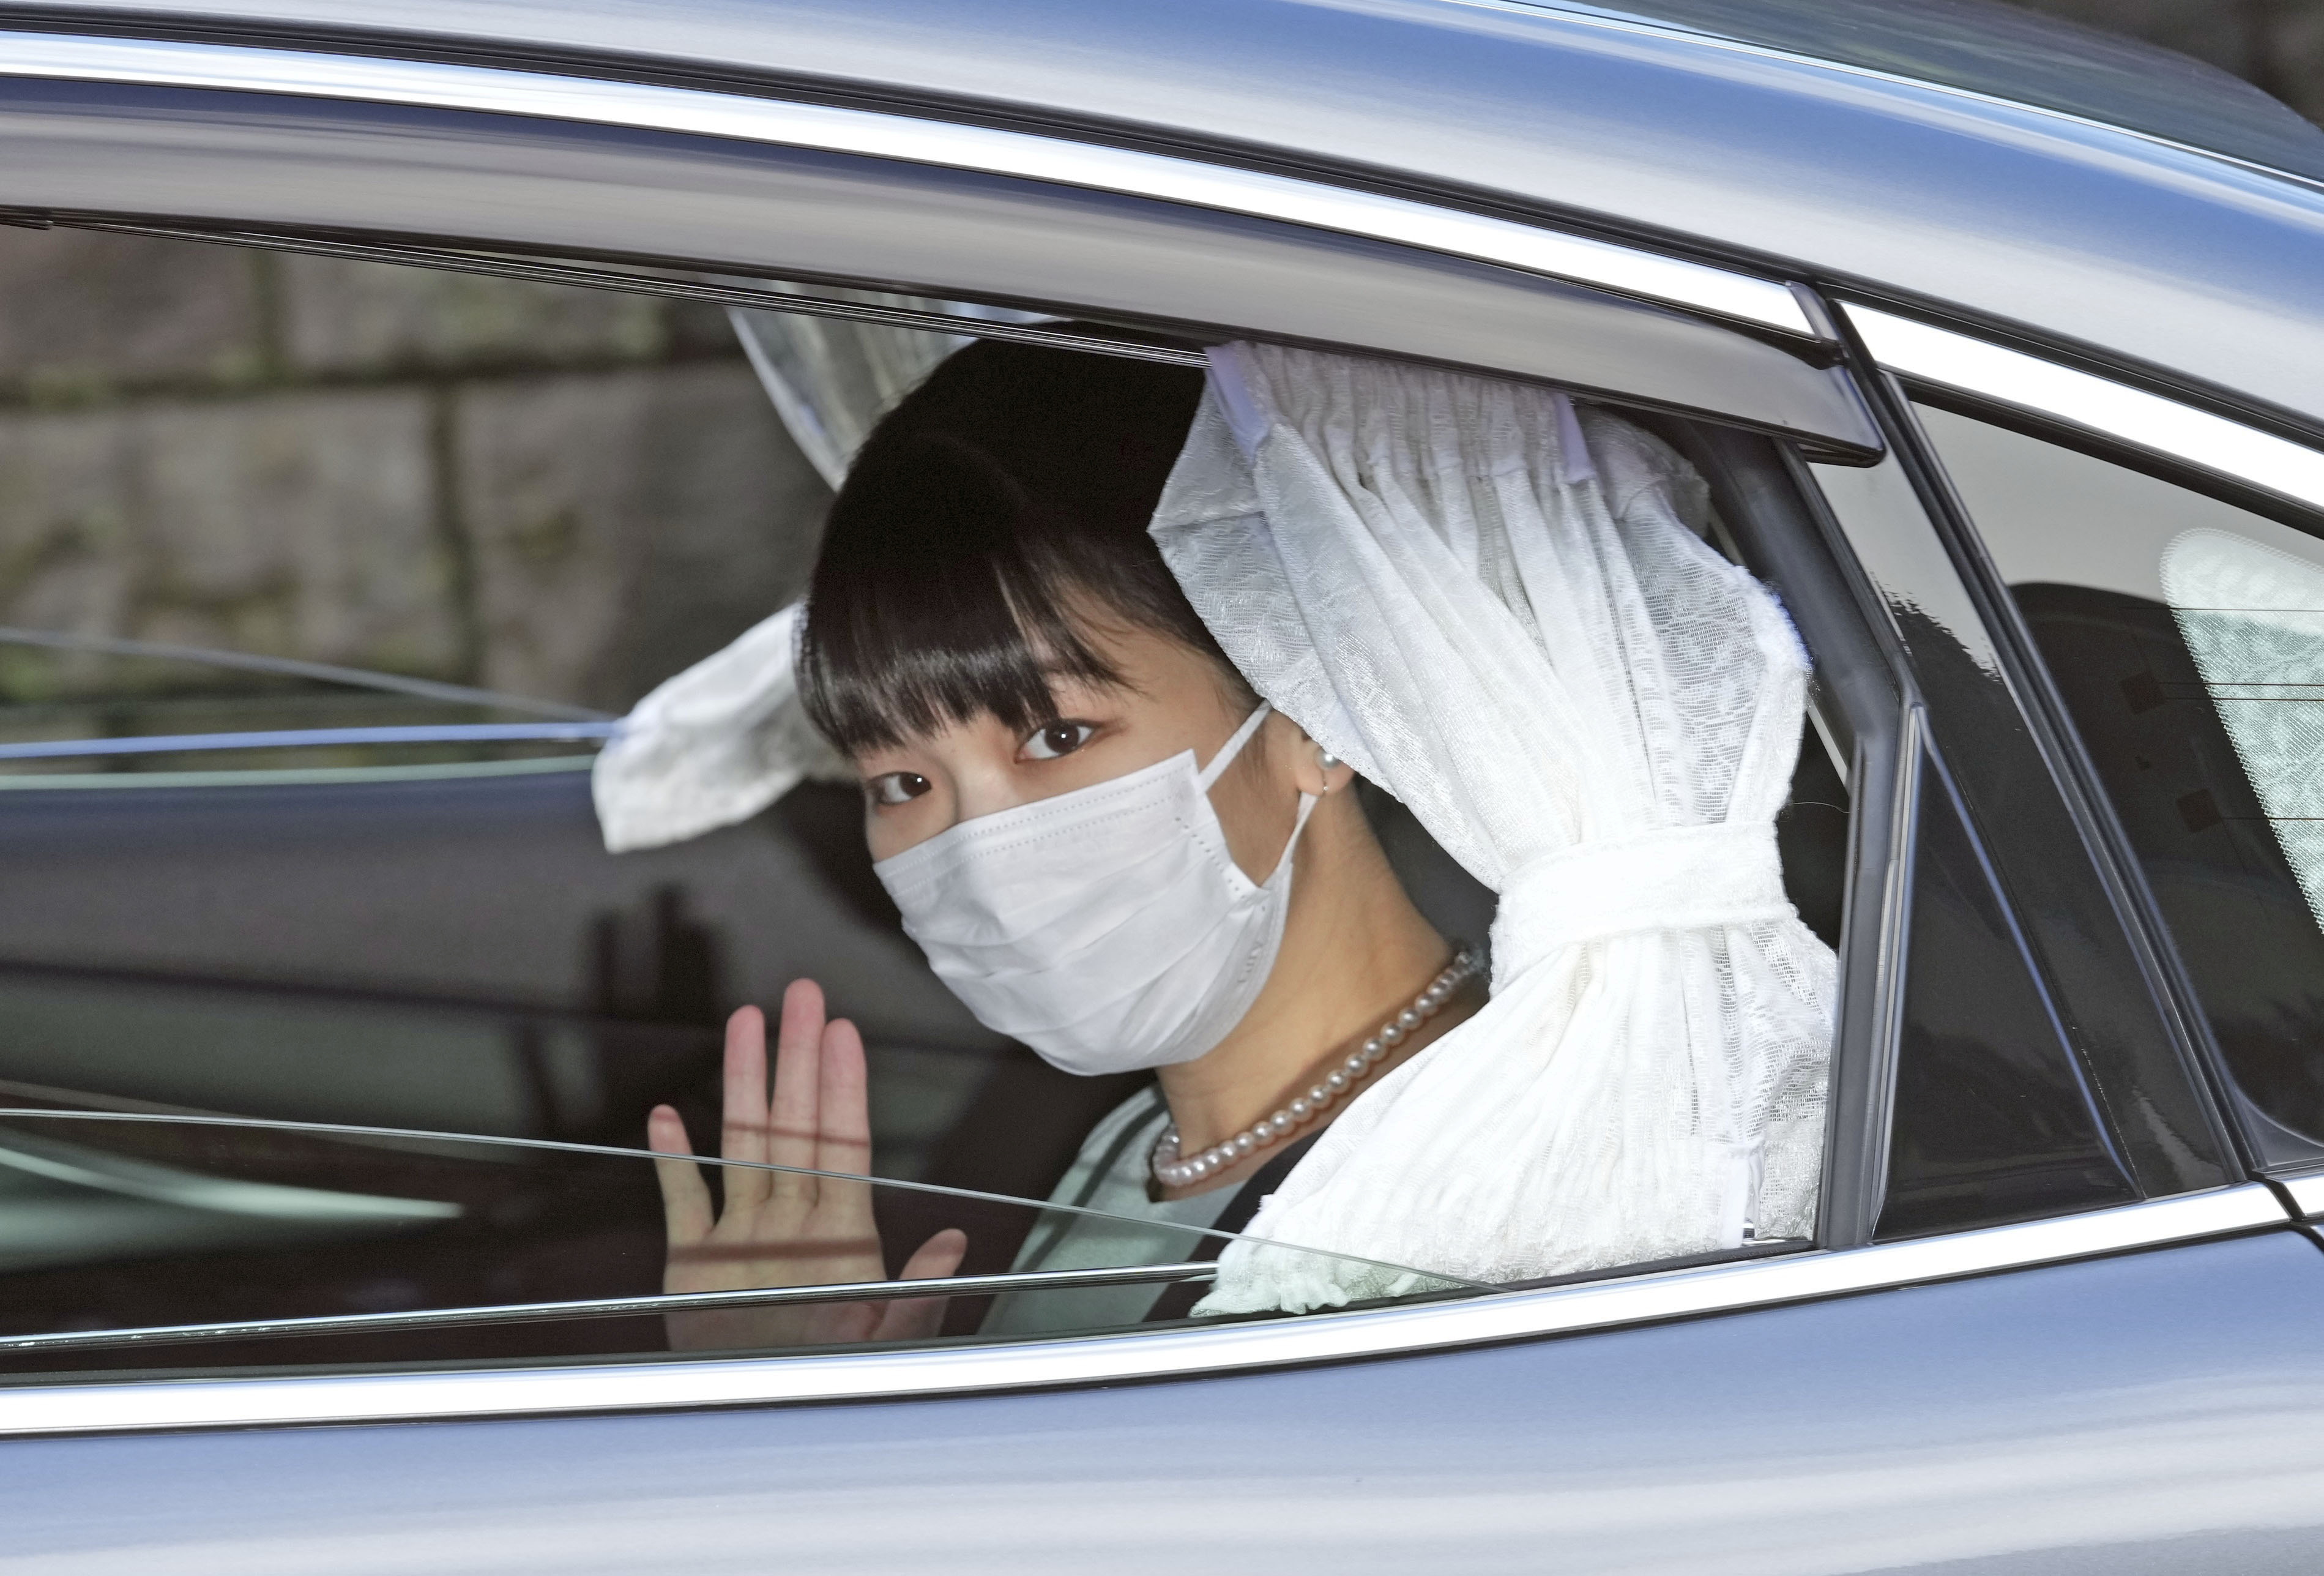 Japan's Princess Mako waves from inside a car as she leaves her home for her marriage in Akasaka Estate in Tokyo, Japan October 26, 2021 in this photo taken by Kyodo. Kyodo/via REUTERS  